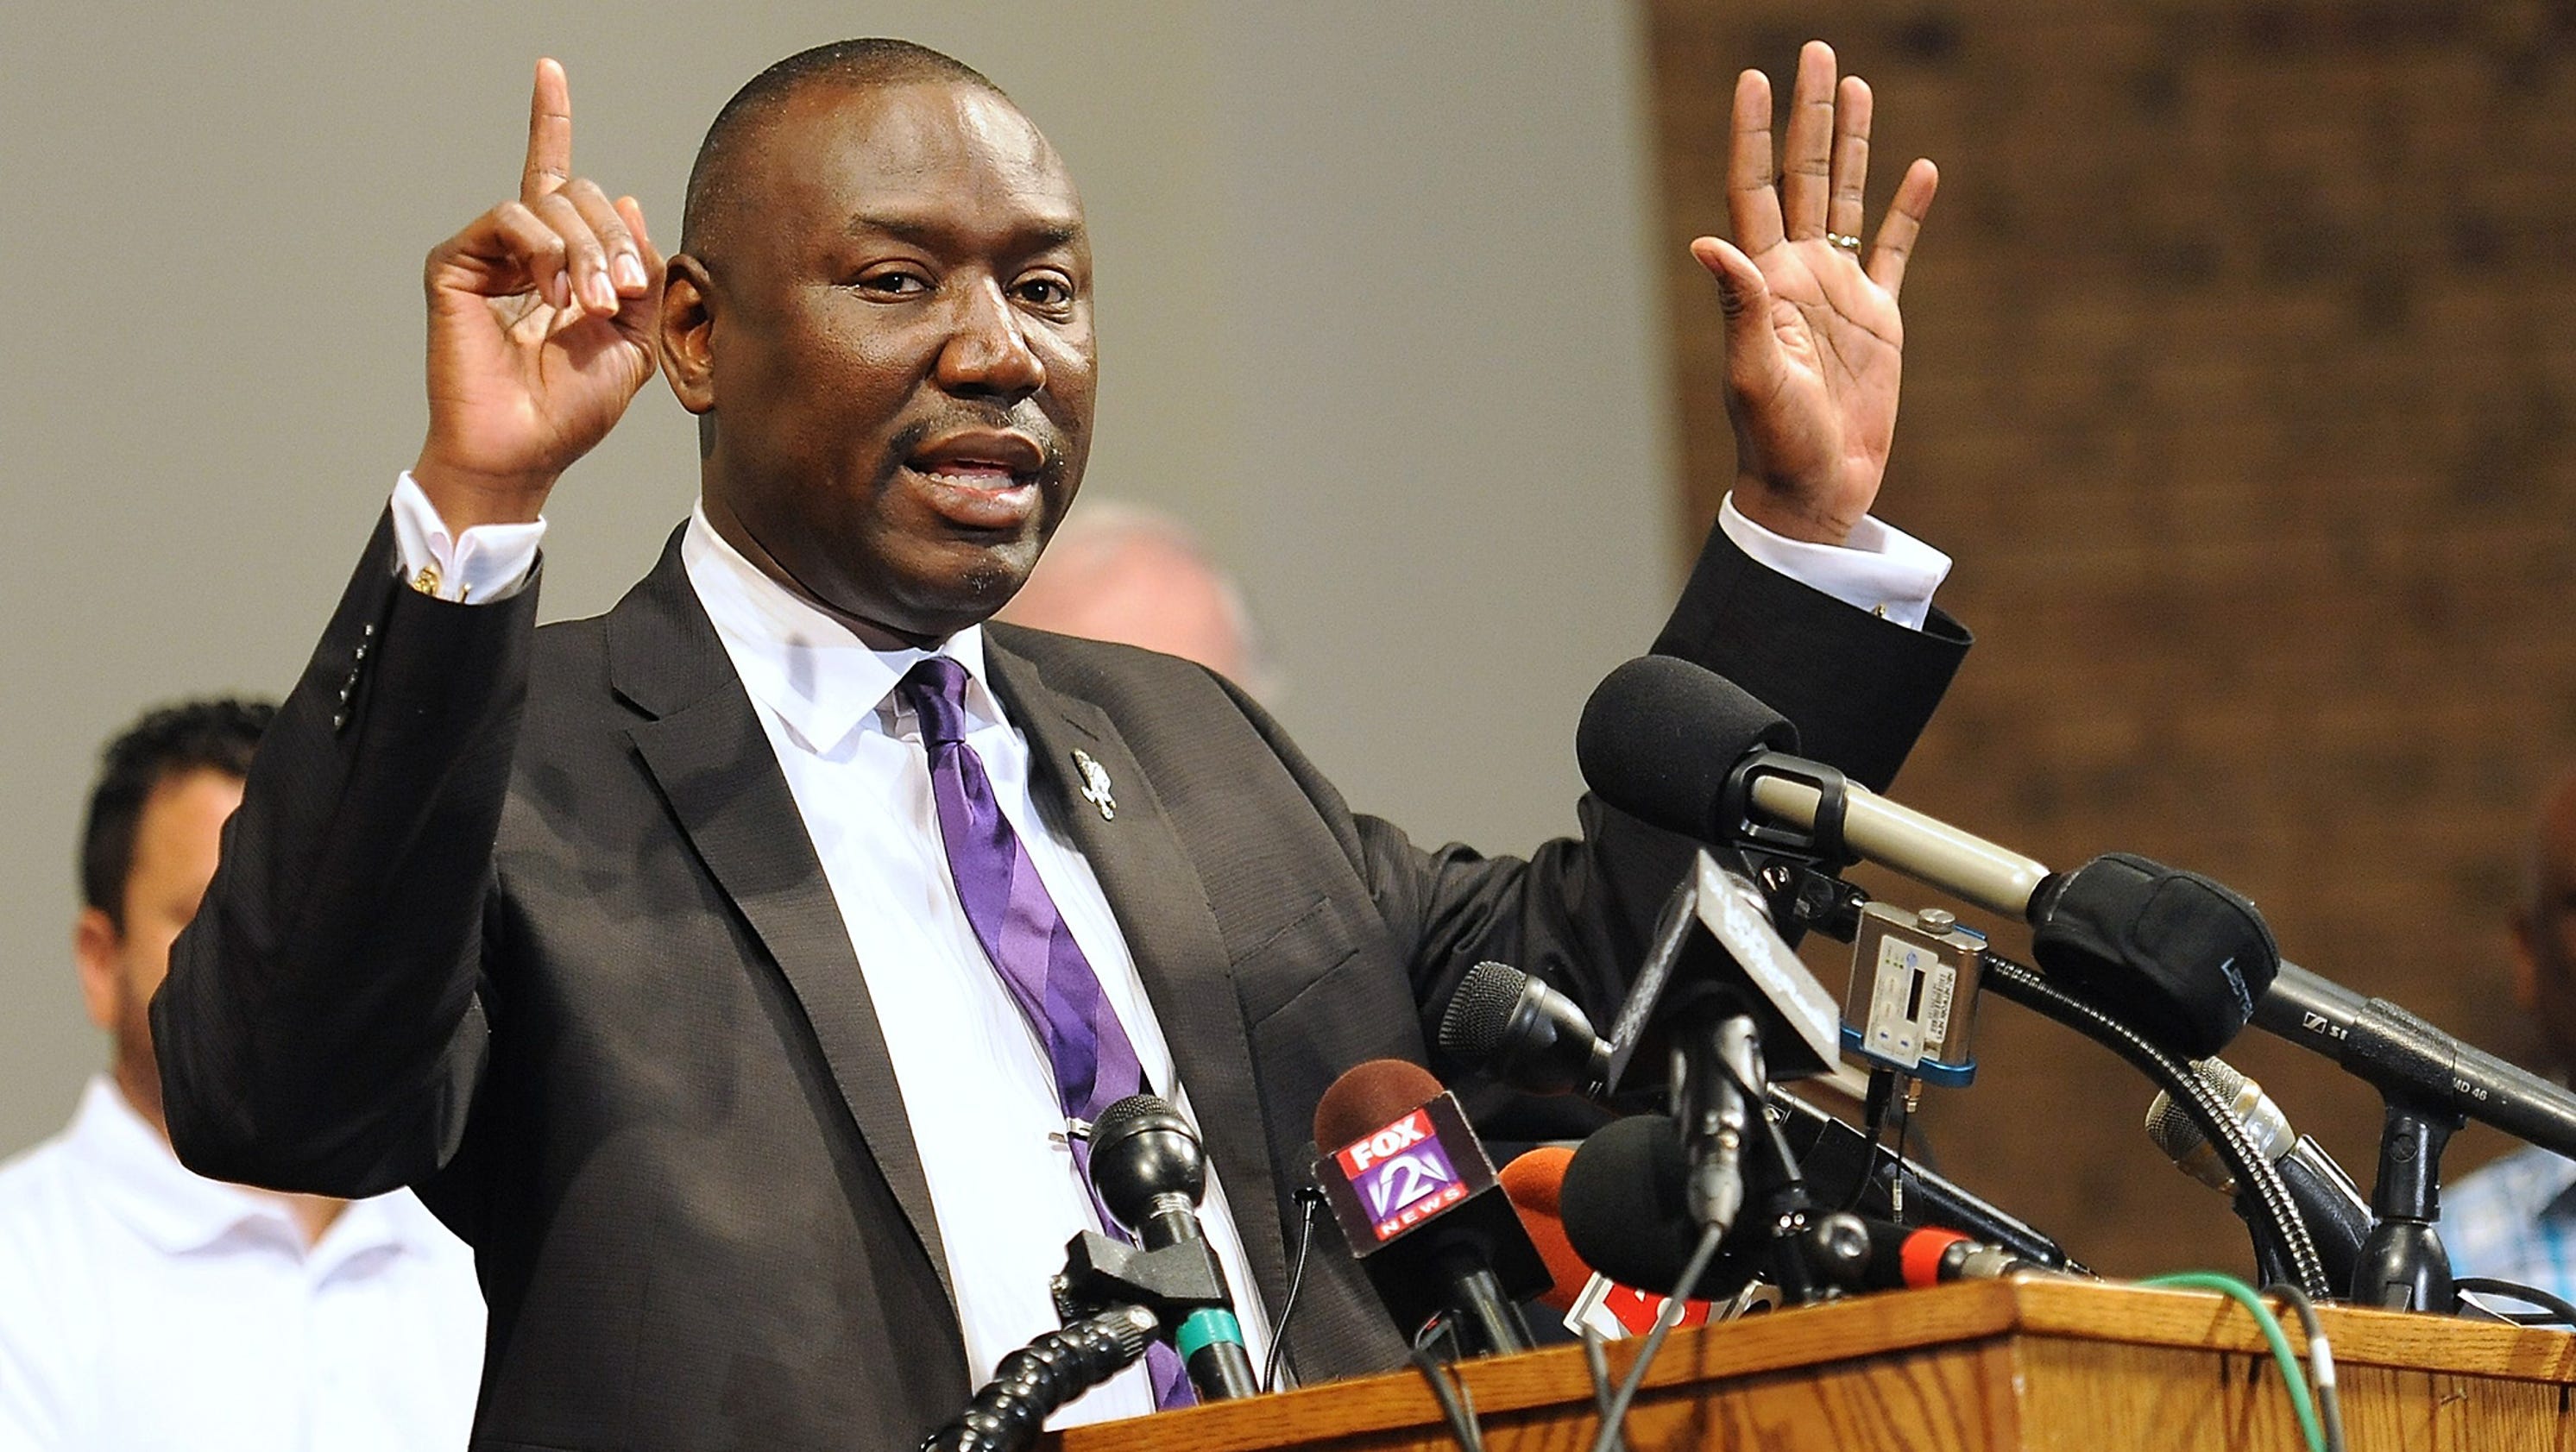 Who is Brown family lawyer Benjamin Crump?